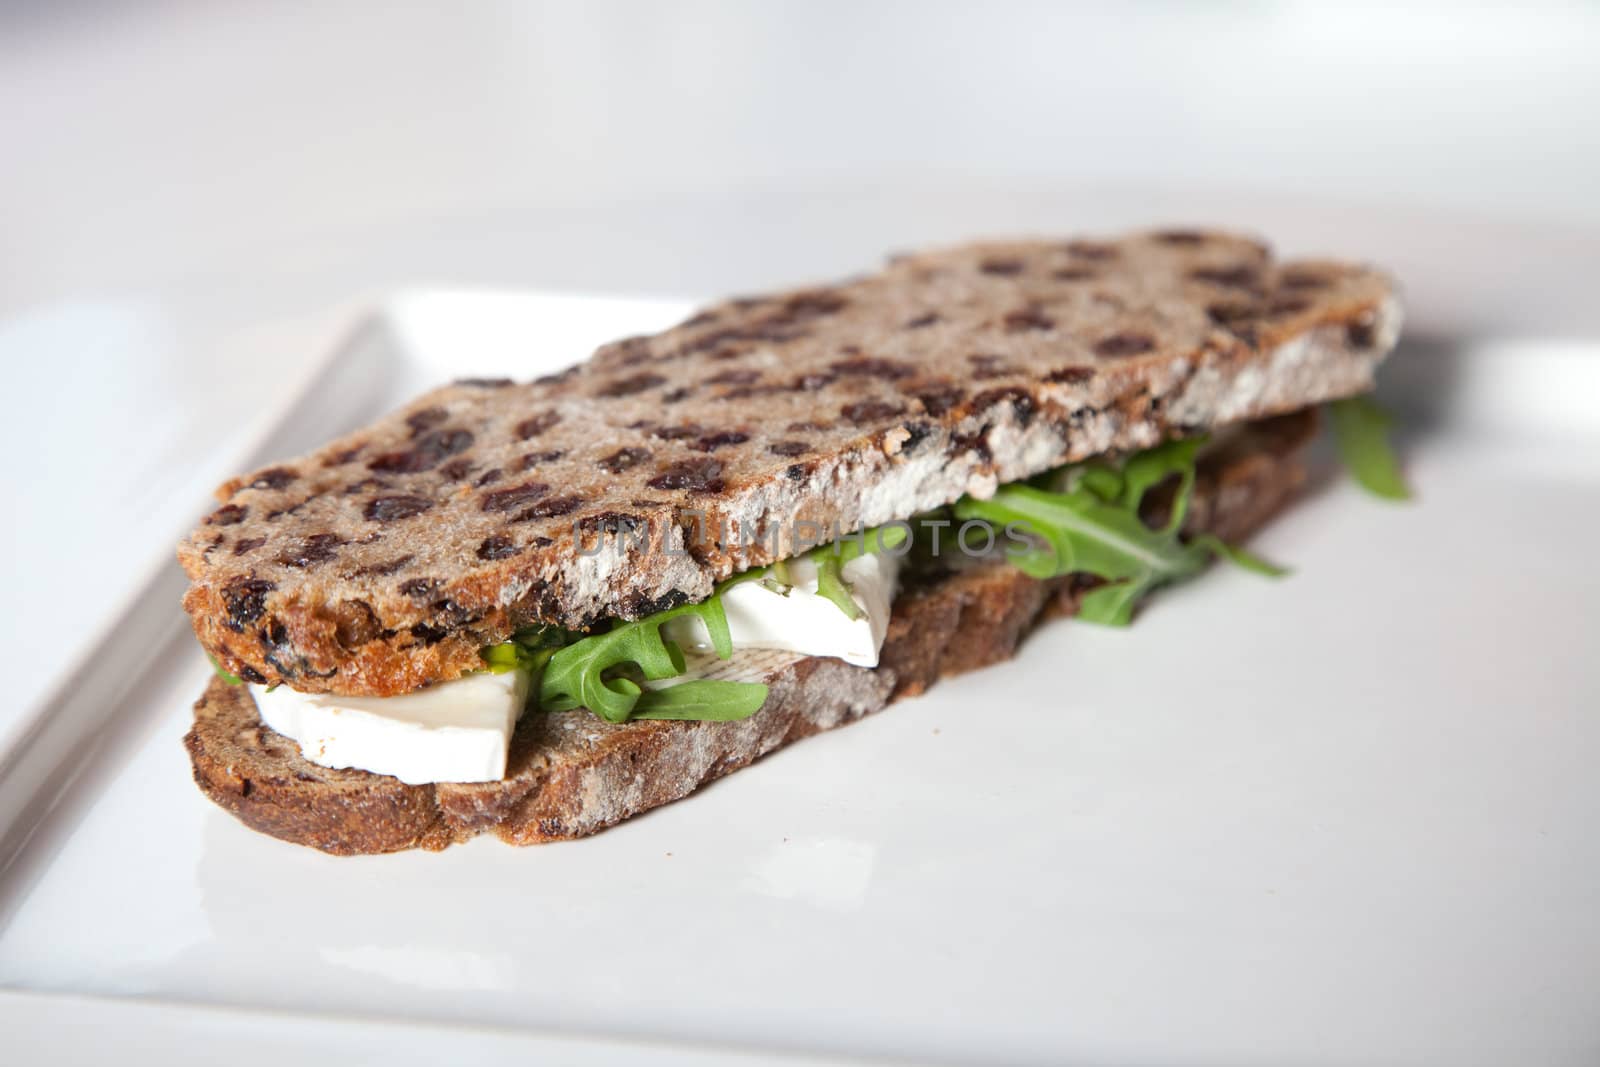 Healthy sandwich with goatcheese, honey and rocket salad